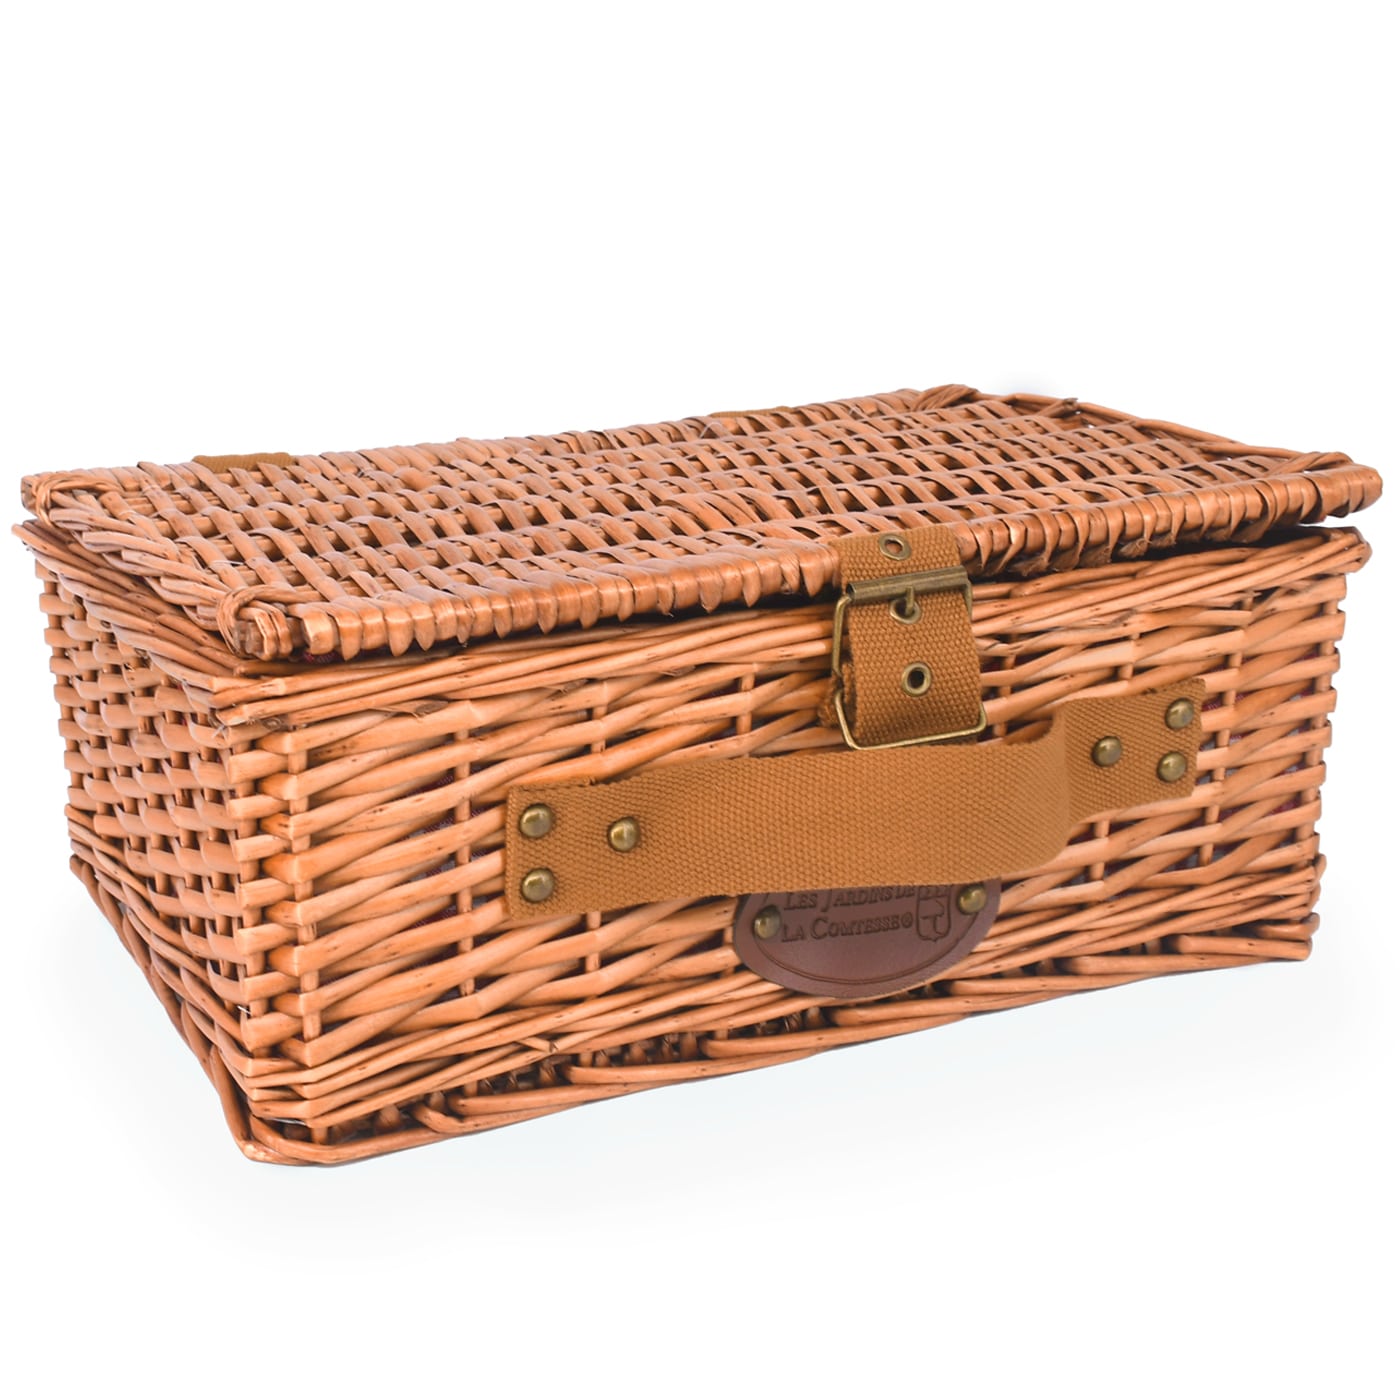 Picnic basket Solo red gingham - 1 person